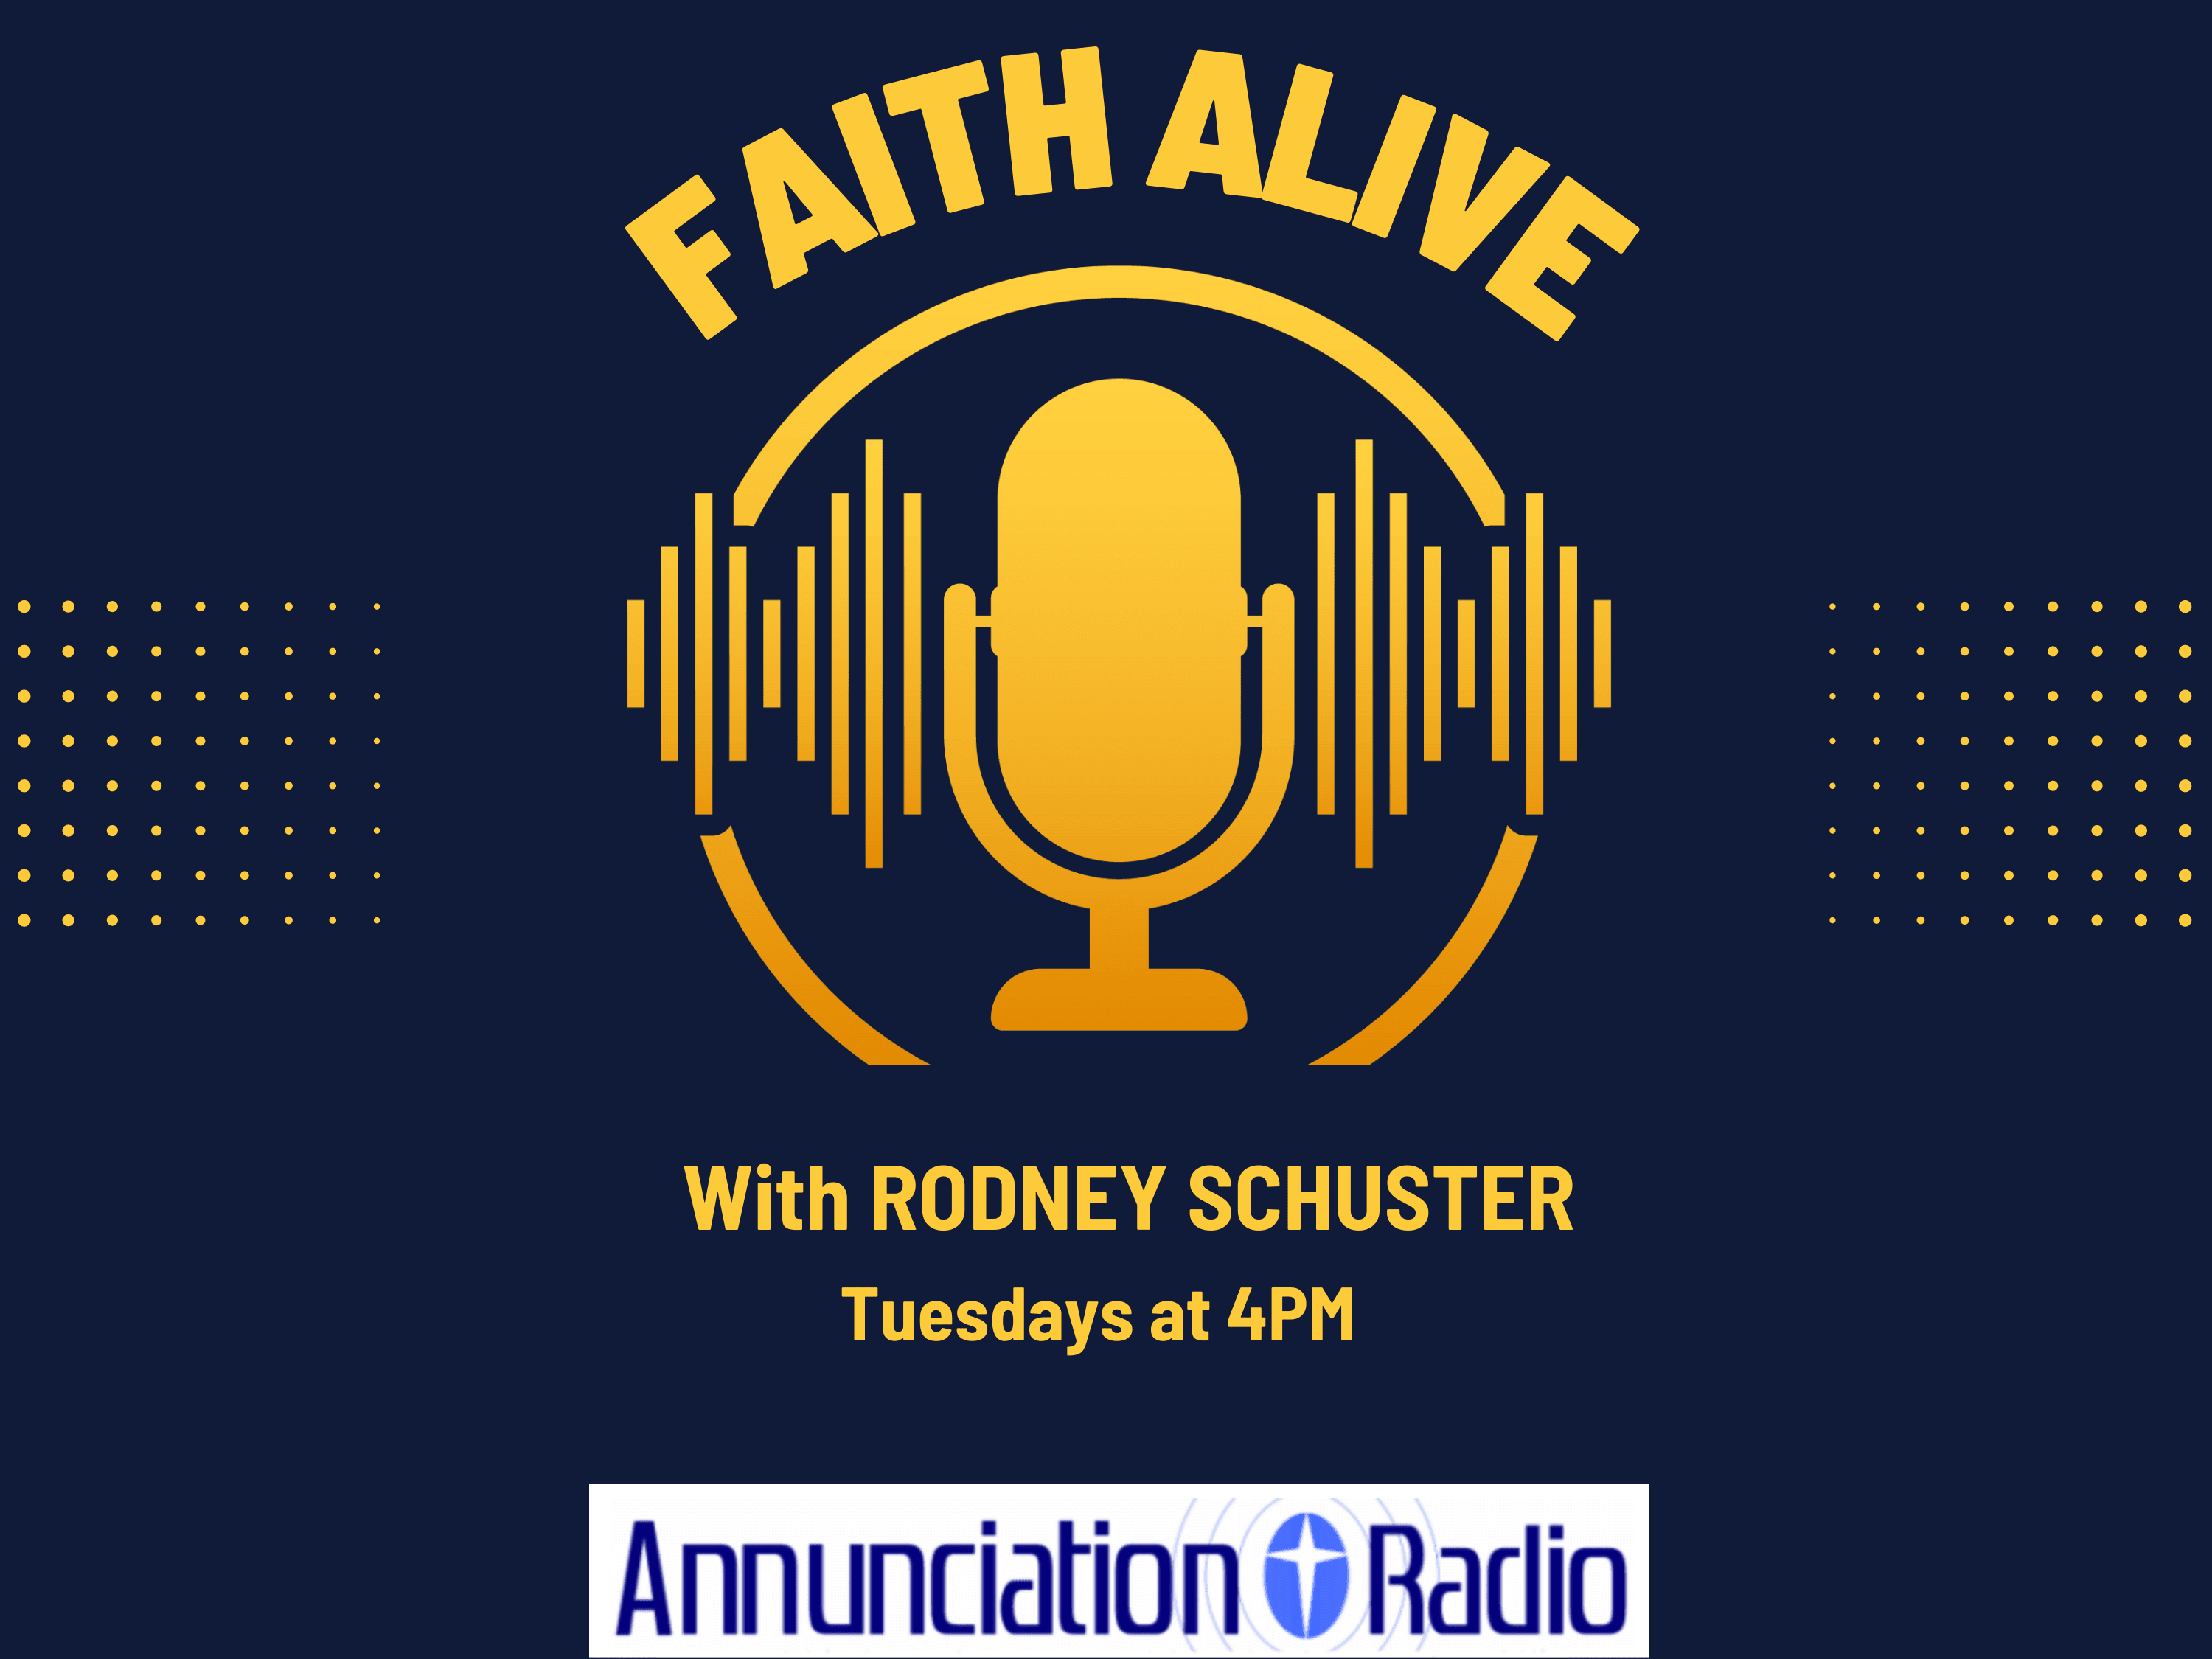 Catholic Charities hour-long Faith Alive program airs weekly on Annunciation Radio on Tuesdays at 4 p.m. and is re-broadcast at 3 p.m. on Saturdays. Listen to archived "Faith Alive" programs on demand.